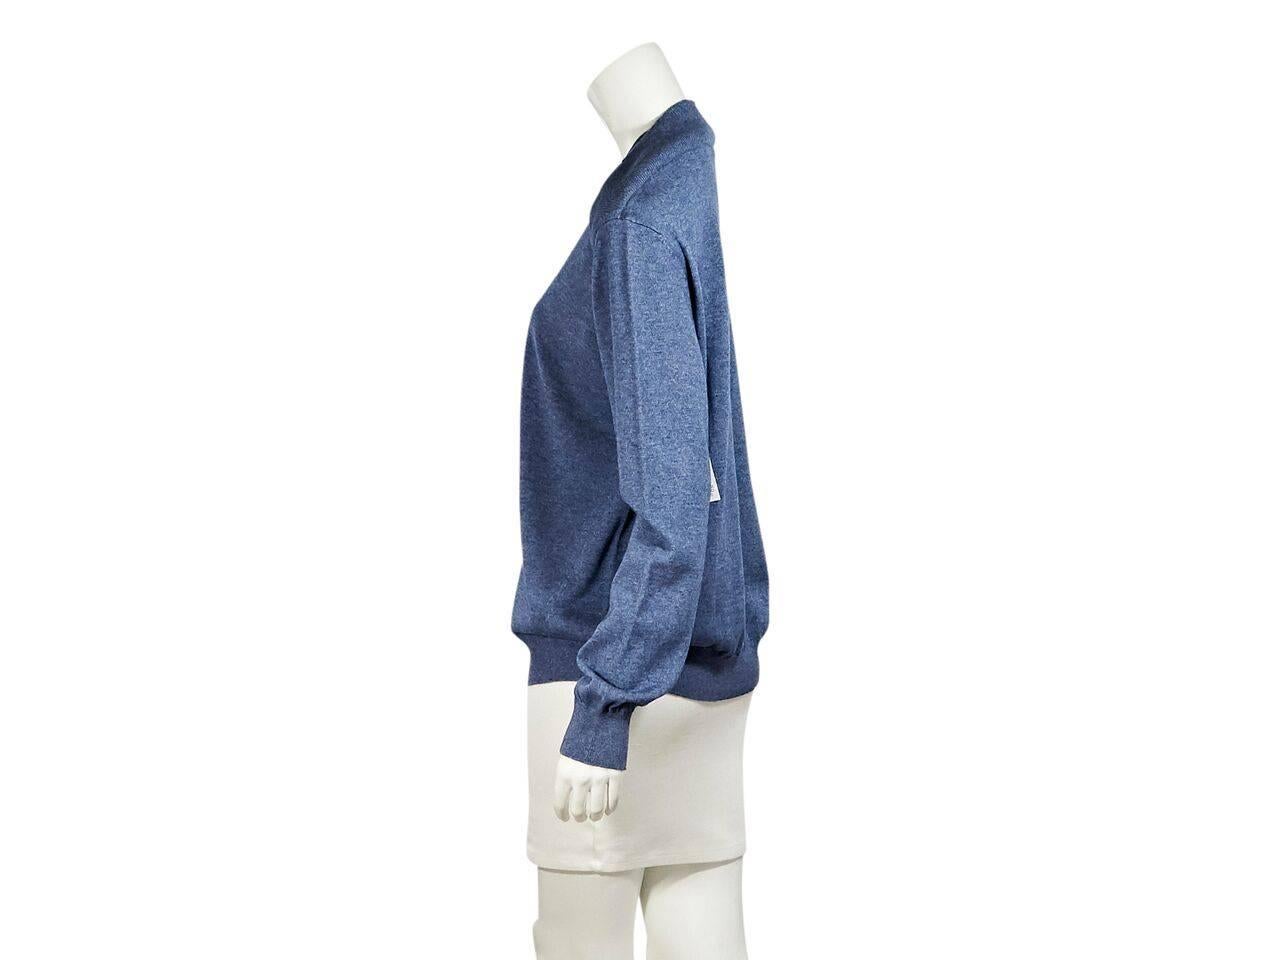 Product details:  Blue knit sweater by Alexander Wang.  Crewneck.  Long sleeves.  Ribbed cuffs and hem.  Pullover style. 
Condition: Pre-owned. New with tags.
Est. Retail $ 328.00